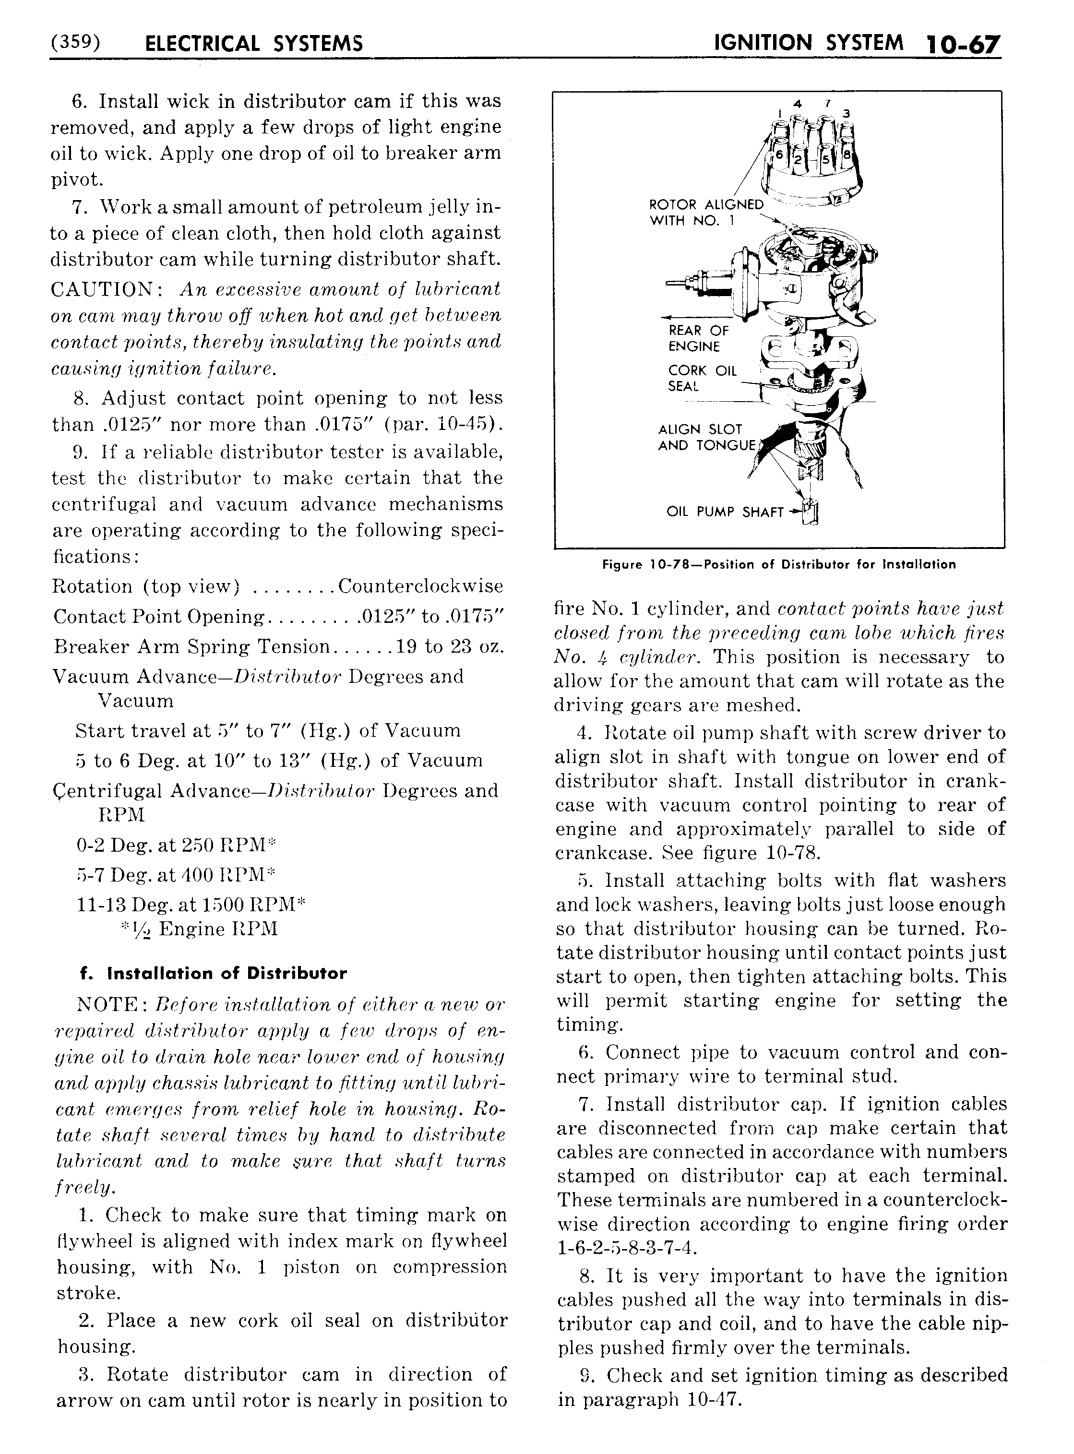 n_11 1951 Buick Shop Manual - Electrical Systems-067-067.jpg